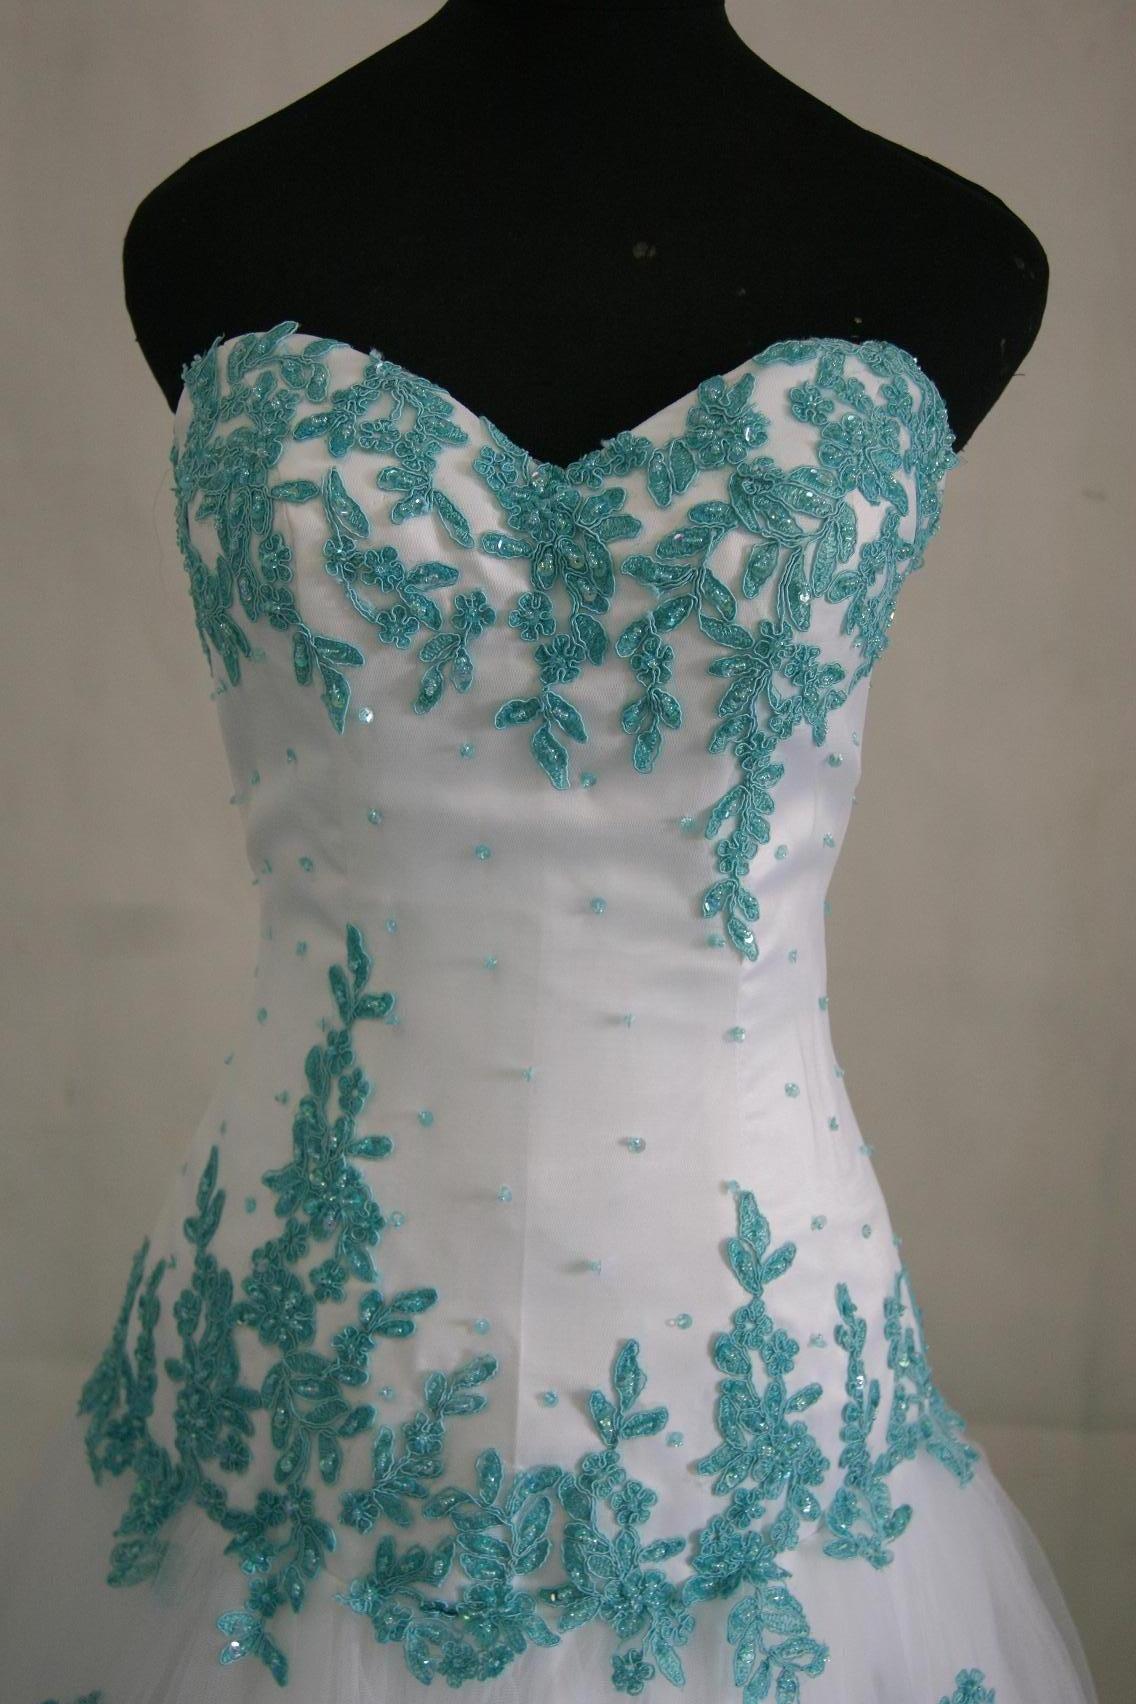 White dress with turquoise appliques